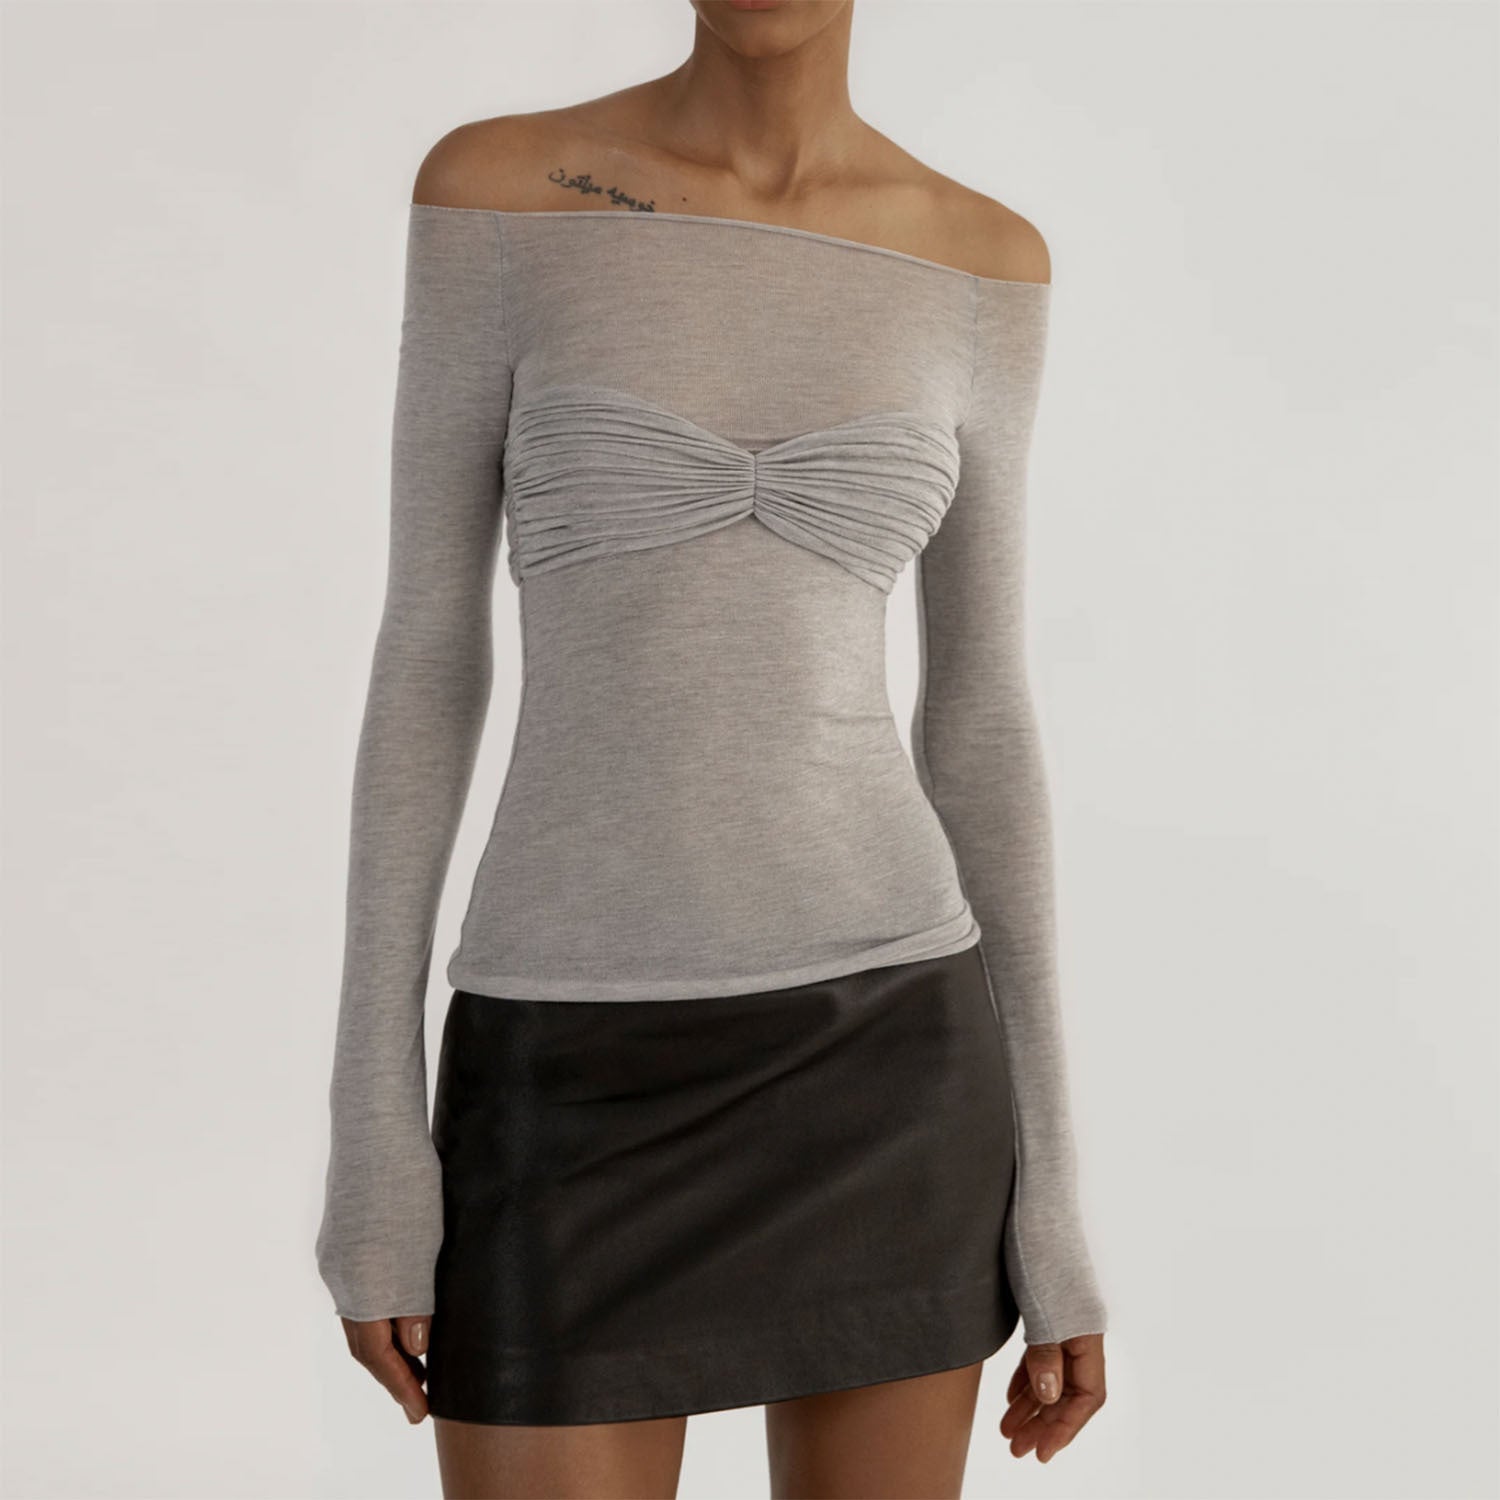 Sexy Off The Shoulder See Through Women Tops-Shirts & Tops-Gray-S-Free Shipping Leatheretro